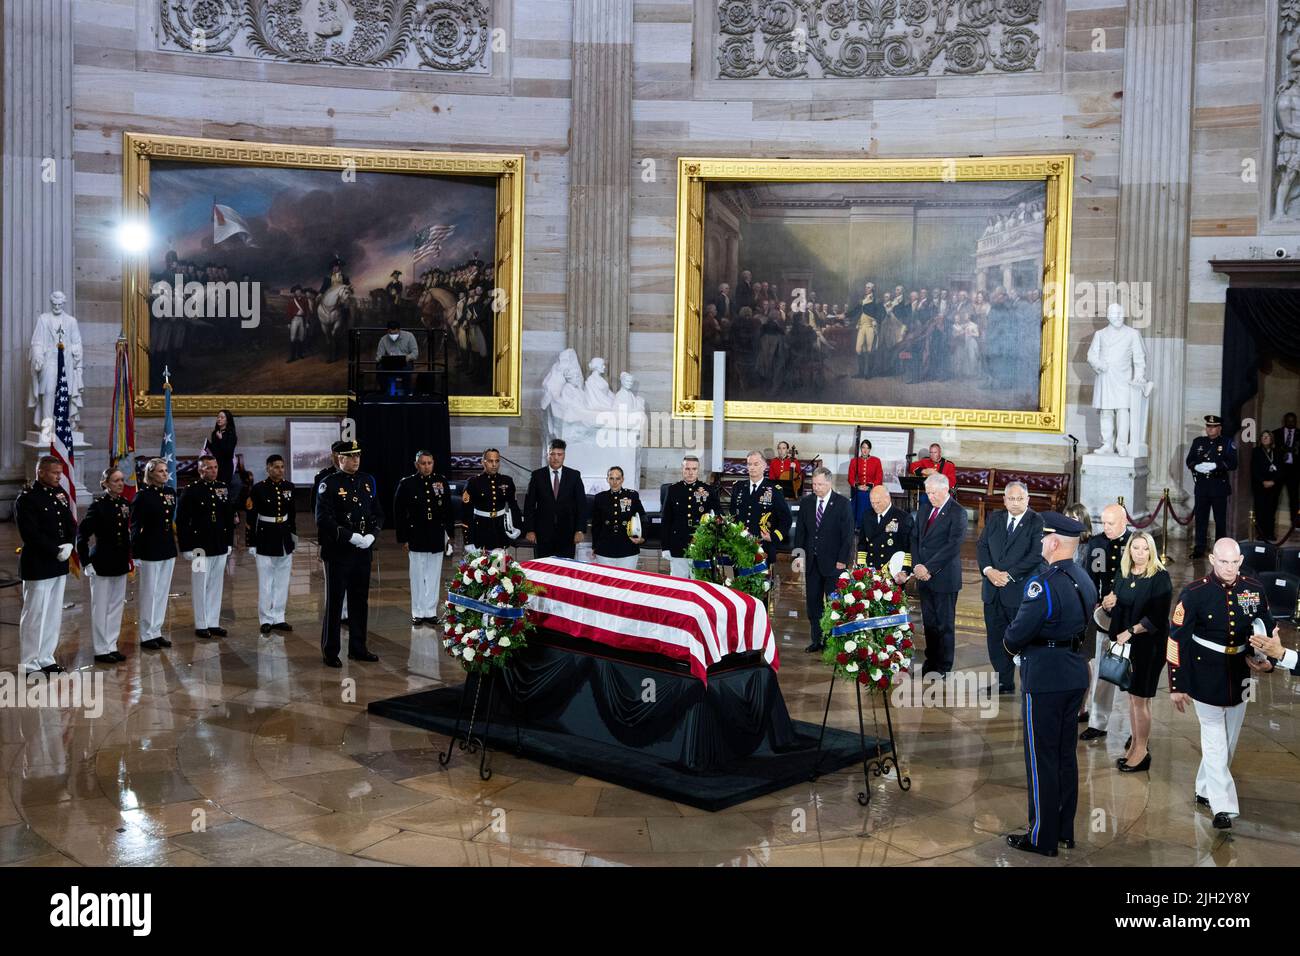 Washington, USA. 14th July, 2022. UNITED STATES - JULY 14: Members of the Marine Corps and others pay respects to Hershel Woodrow “Woody” Williams, the last Medal of Honor recipient of World War II to pass away, in the U.S. Capitol Rotunda as his remains lie in honor in Washington, DC, on Thursday, July 14, 2022. Williams, who passed away at age 98, received the award for action in the Battle of Iwo Jima. (Photo by Tom Williams/Pool/Sipa USA) Credit: Sipa USA/Alamy Live News Stock Photo